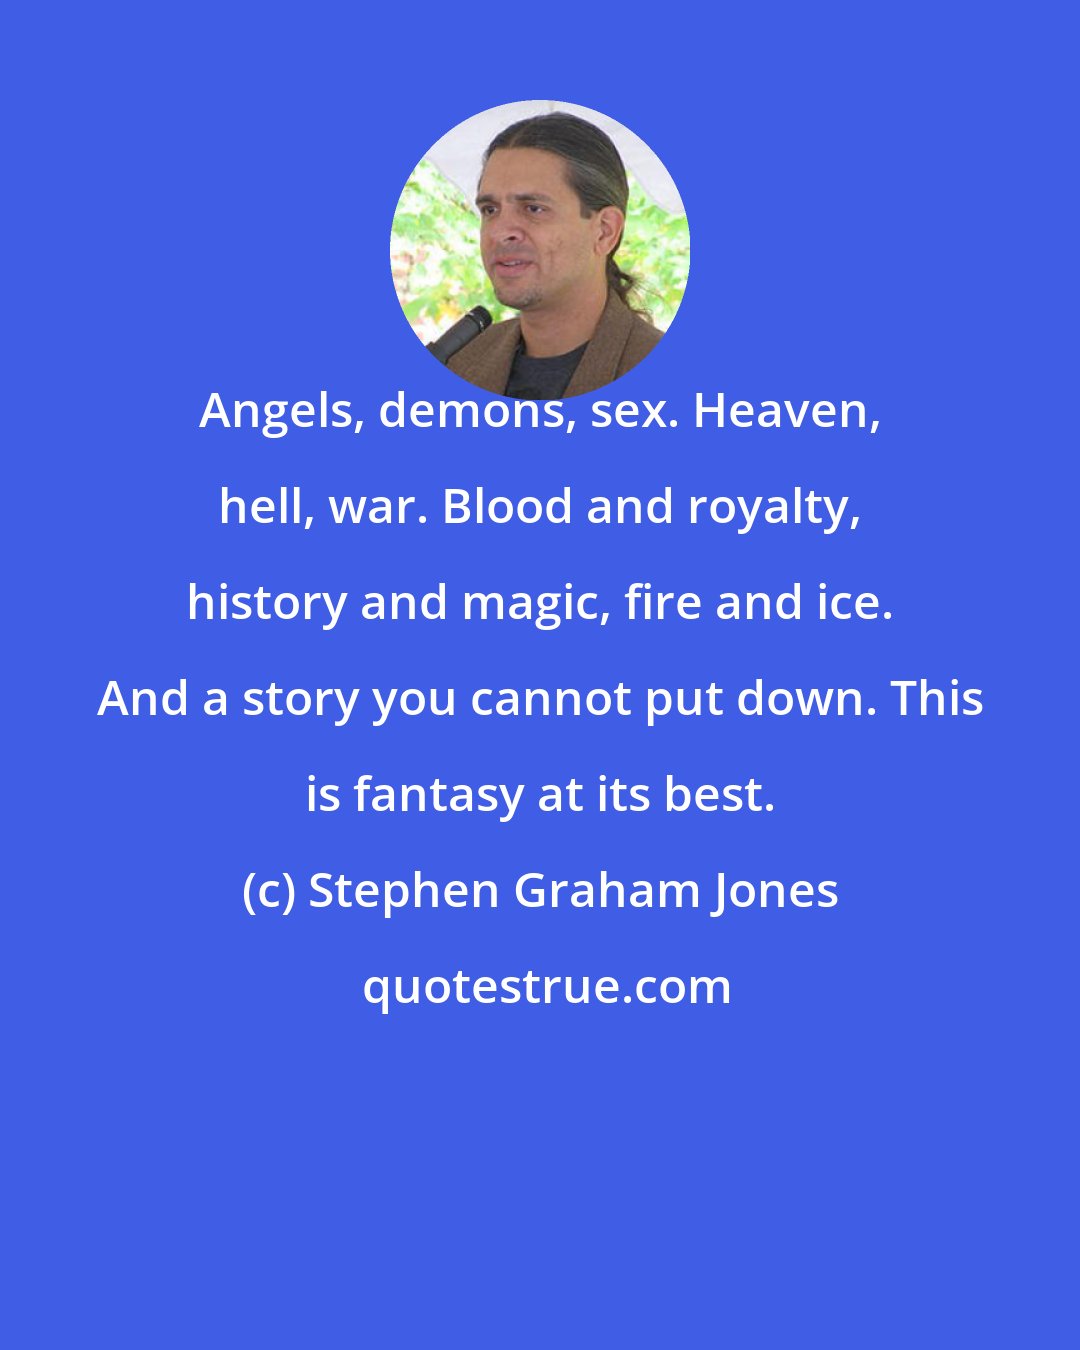 Stephen Graham Jones: Angels, demons, sex. Heaven, hell, war. Blood and royalty, history and magic, fire and ice. And a story you cannot put down. This is fantasy at its best.